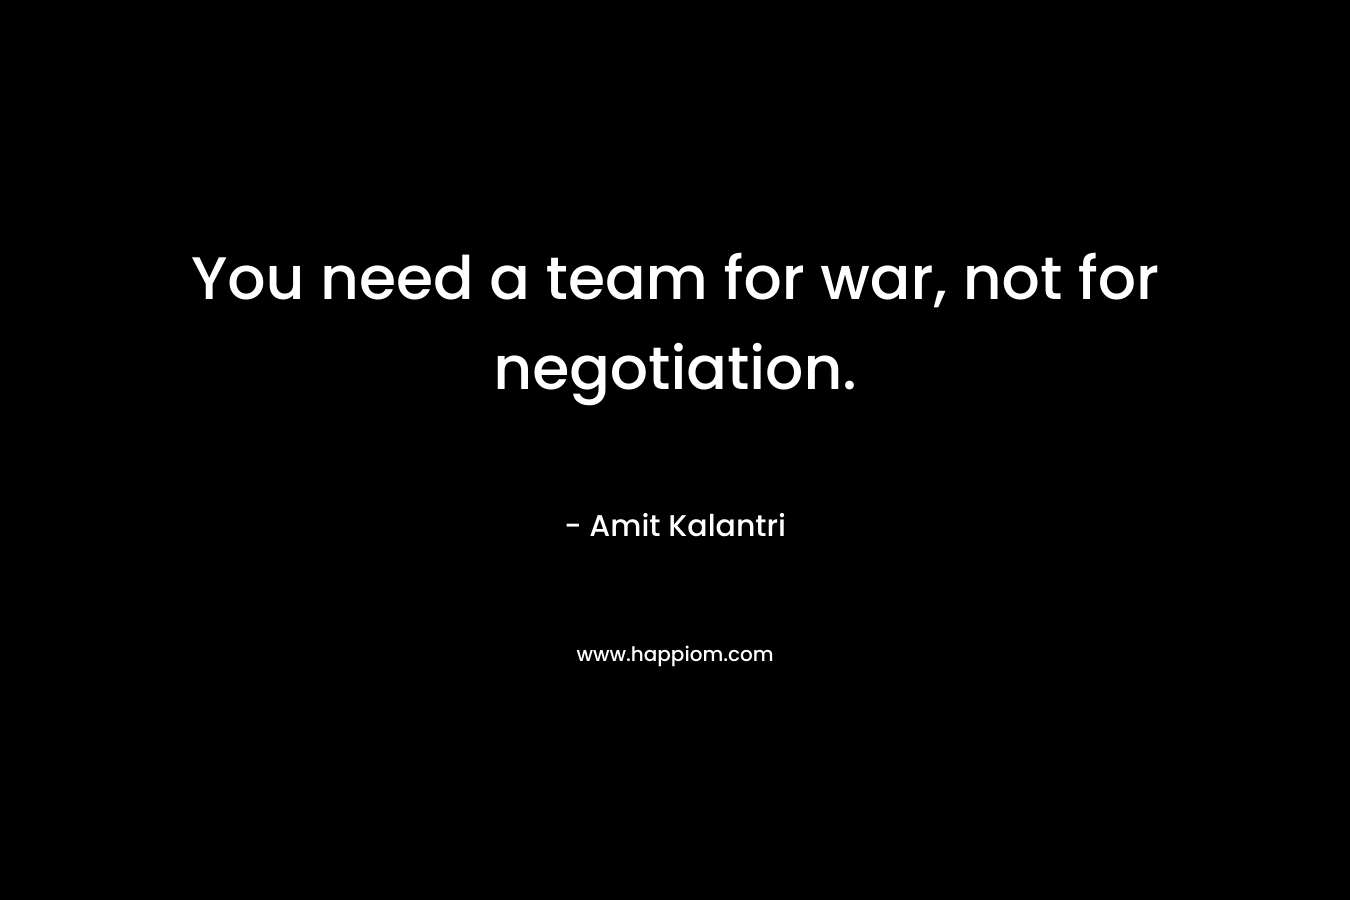 You need a team for war, not for negotiation. – Amit Kalantri